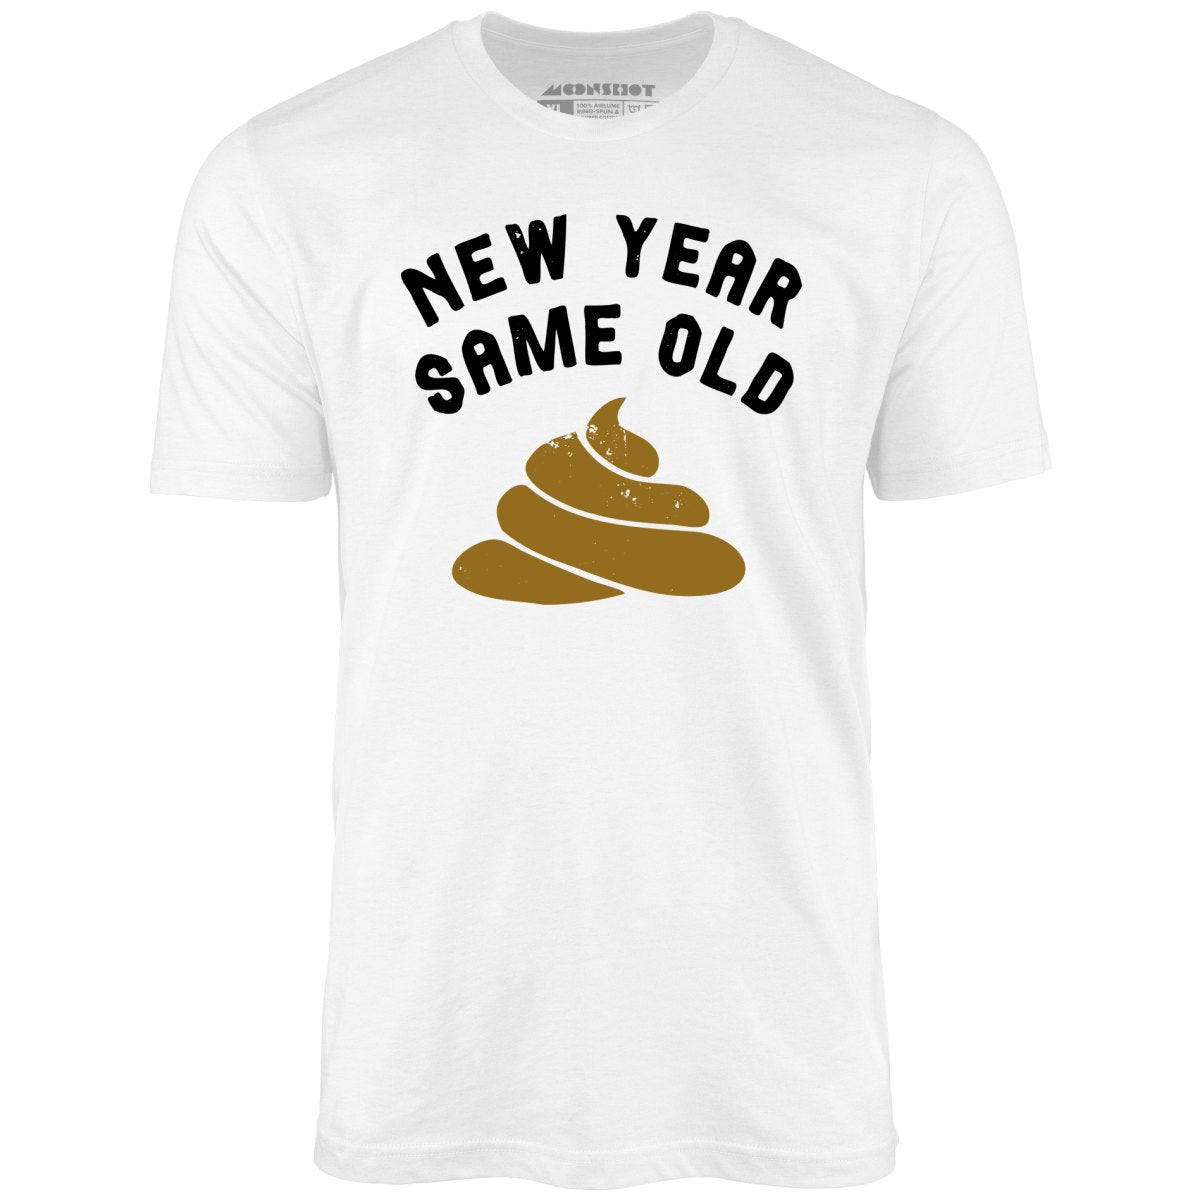 New Year Same Old - Unisex T-Shirt